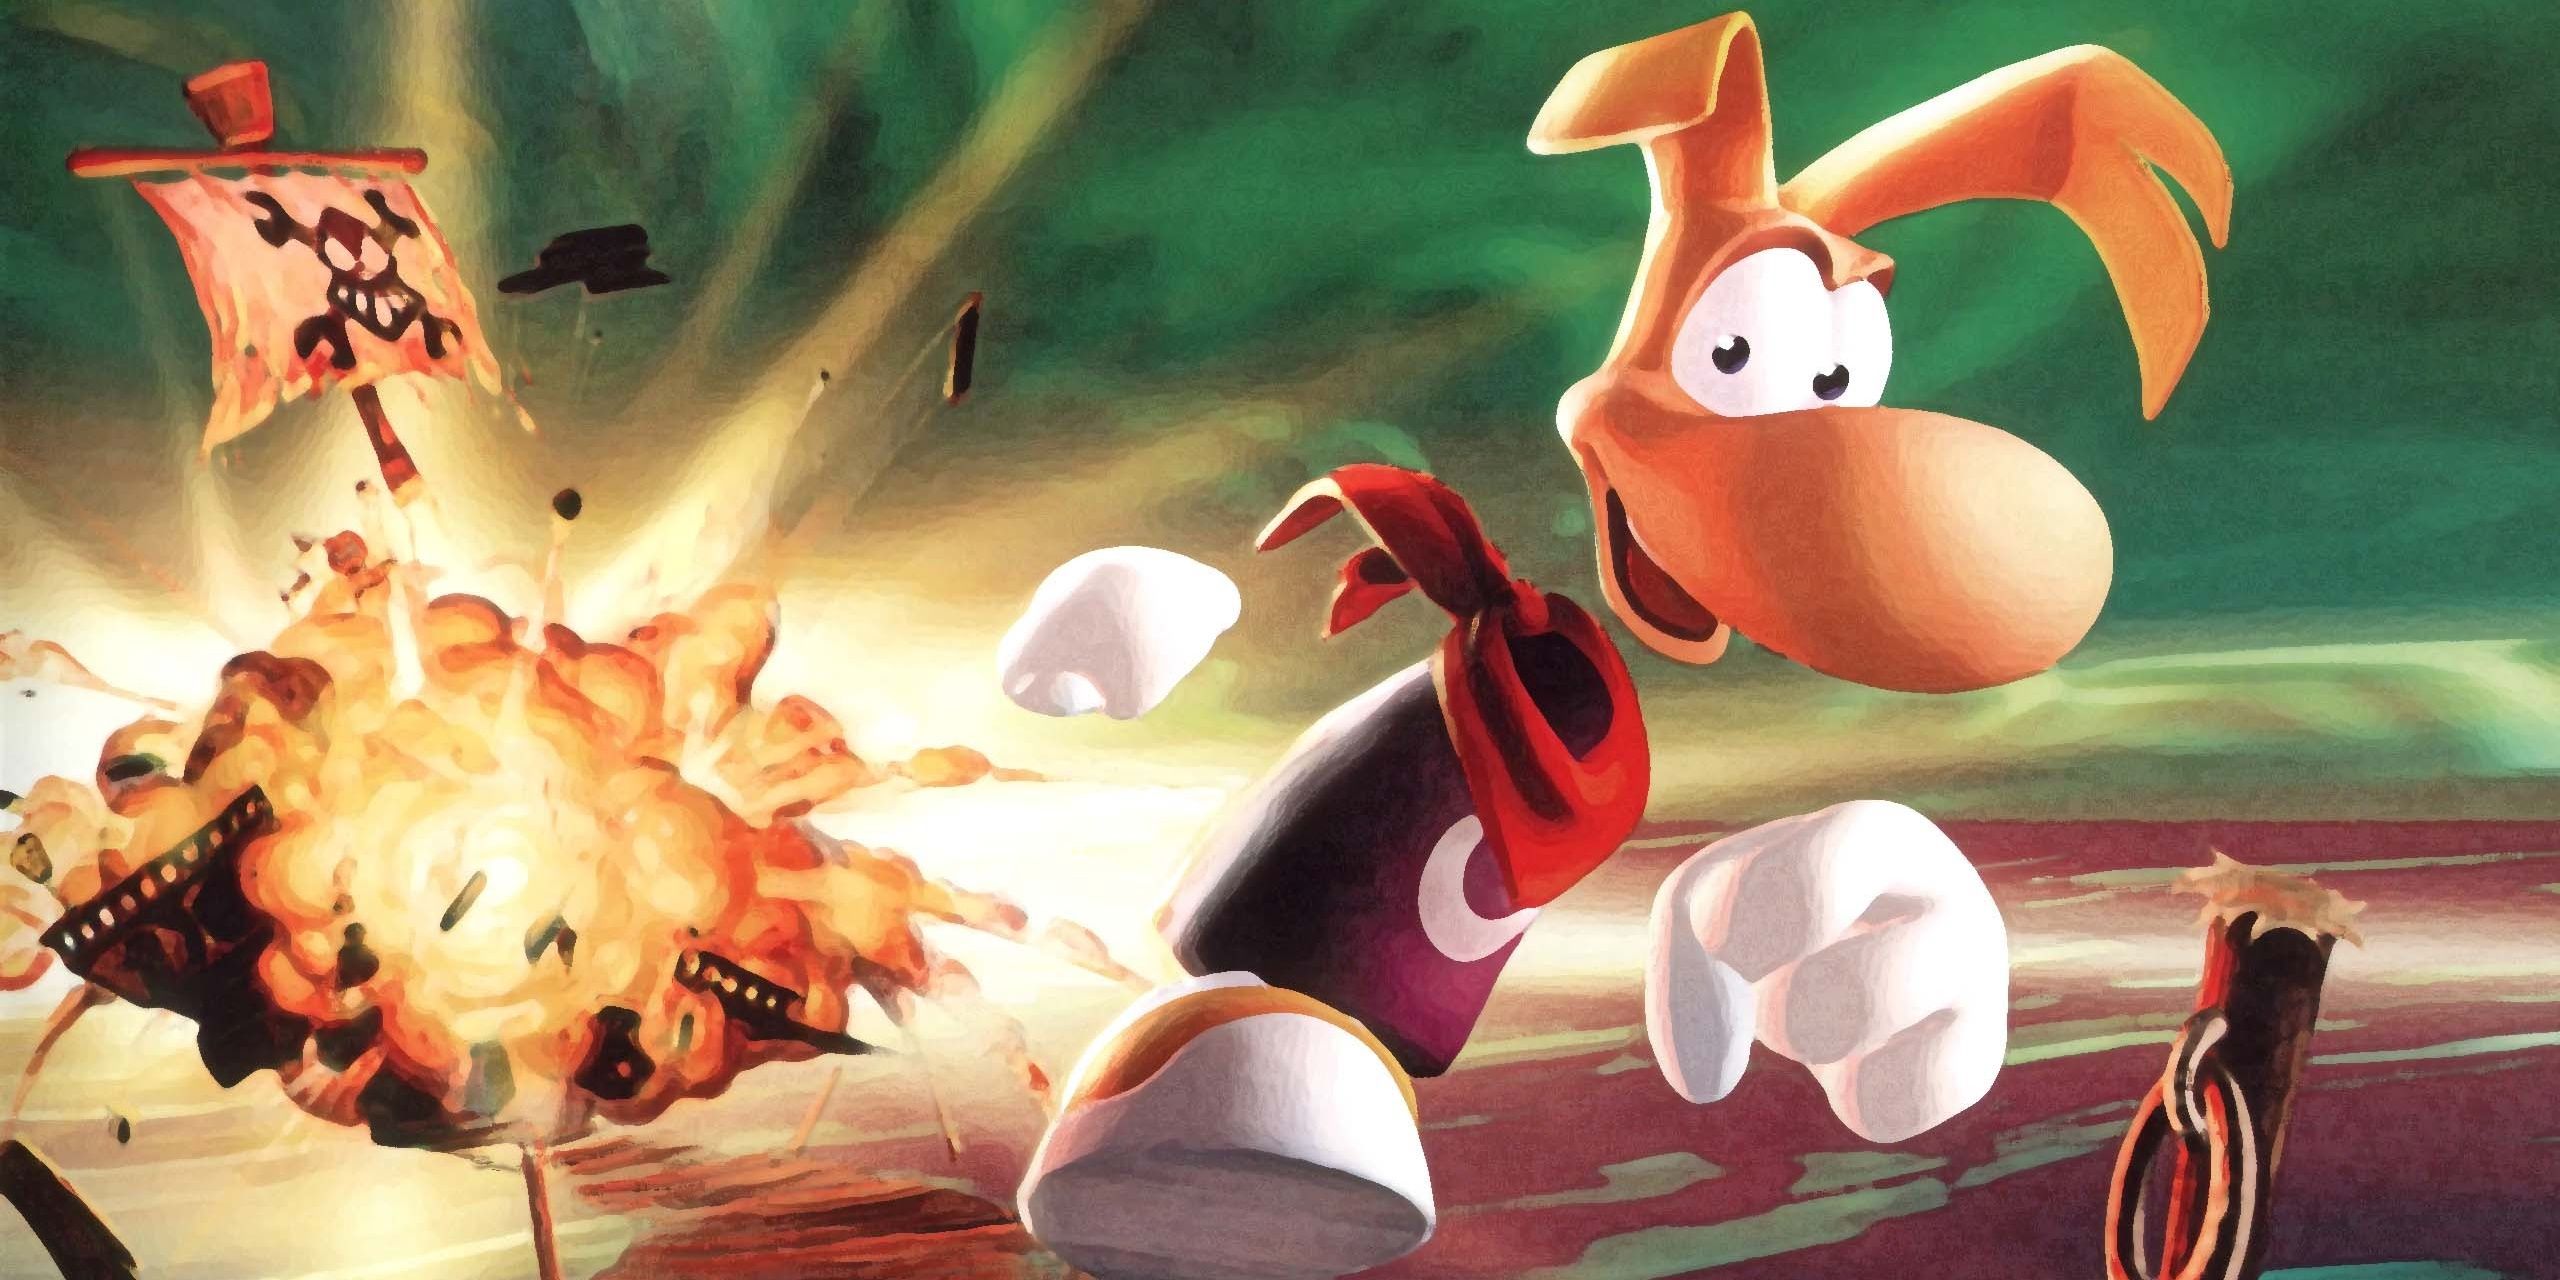 Rayman in Rayman 2: The Great Escape